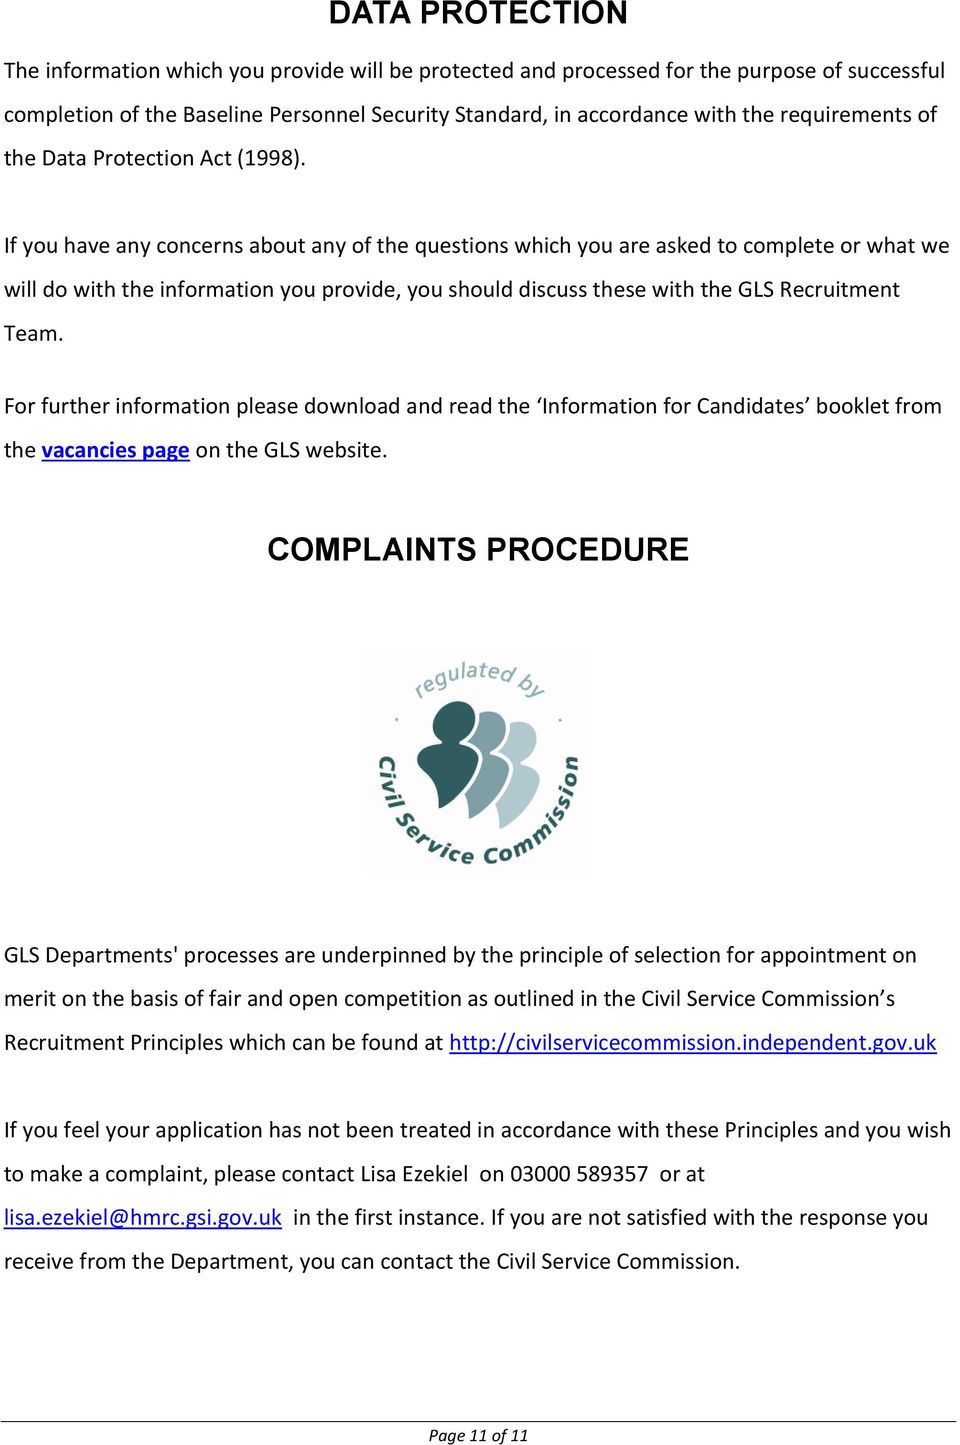 If you have any concerns about any of the questions which you are asked to complete or what we will do with the information you provide, you should discuss these with the GLS Recruitment Team.